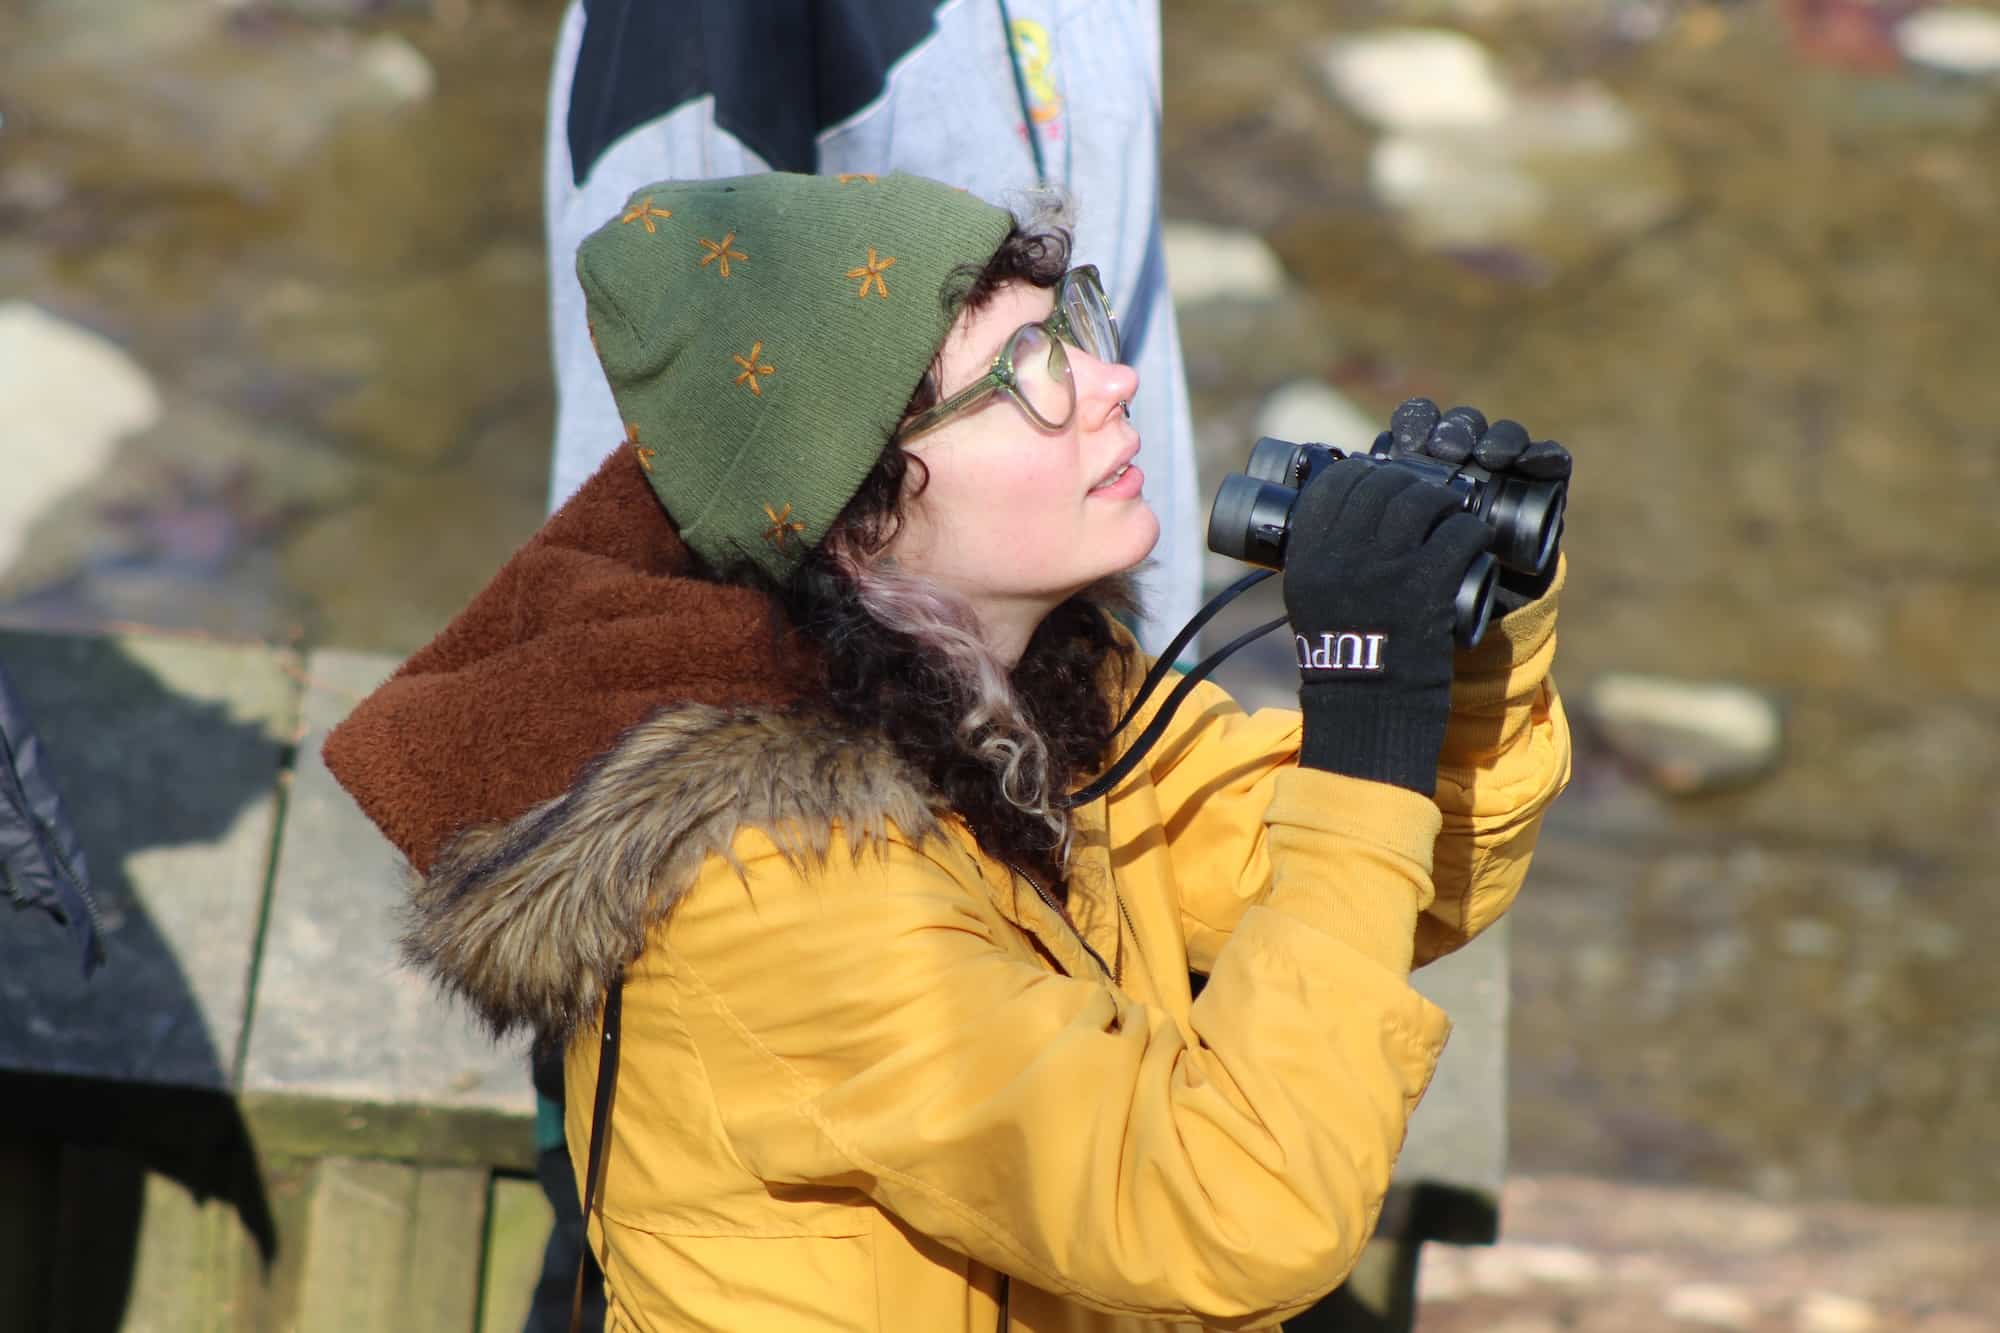 A person wearing glasses and a green hat holds their binoculars down as they look to the sky.